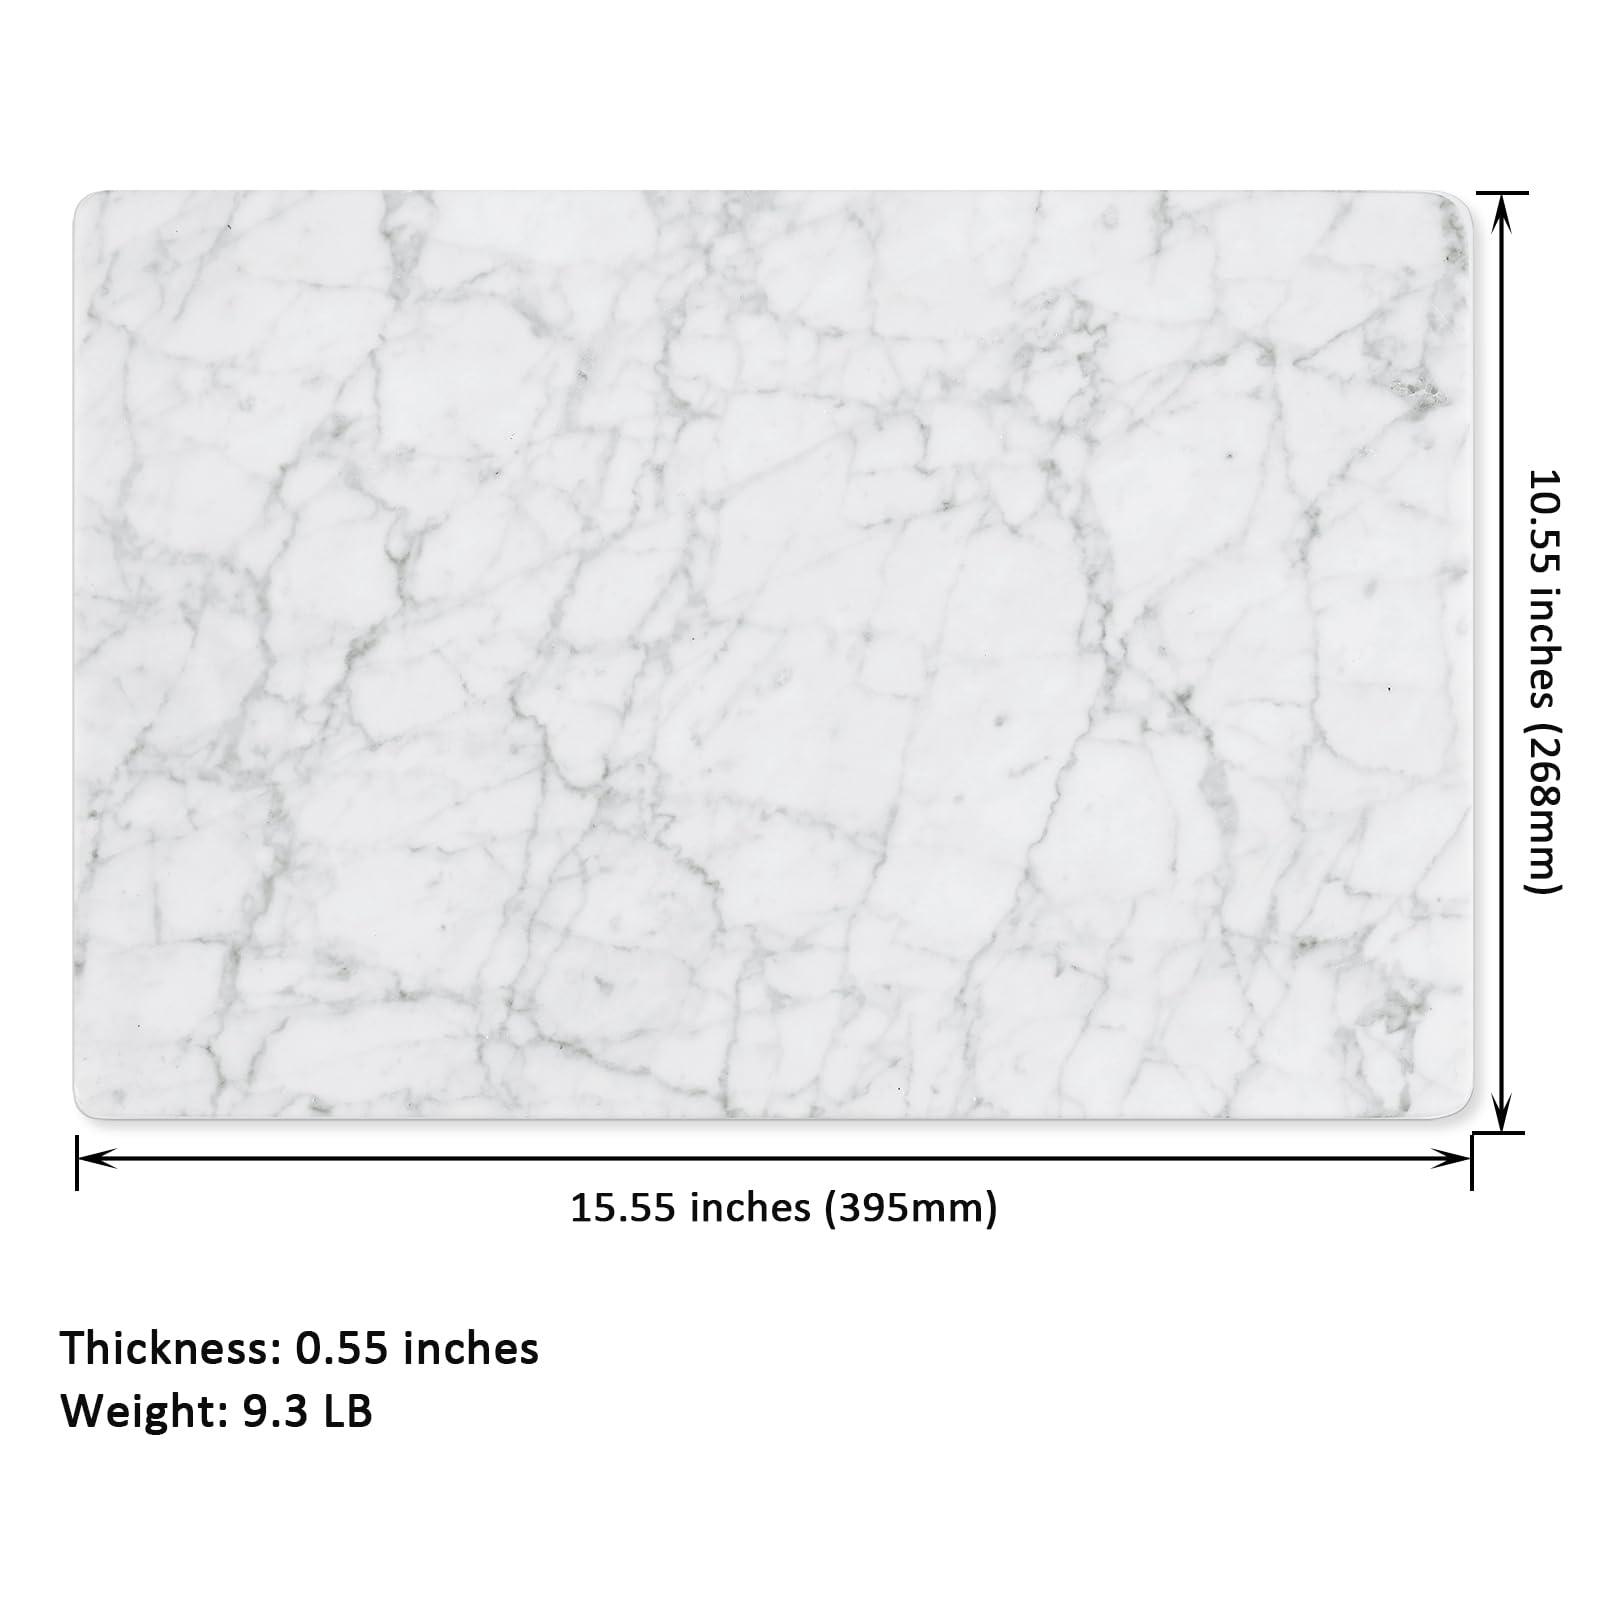 Tilingview Natural Carrara White Marble Board for Kitchen, Pastry Cheese Tray, Cutting Board with Non-Slip Rubber Feet (16"x10") - CookCave